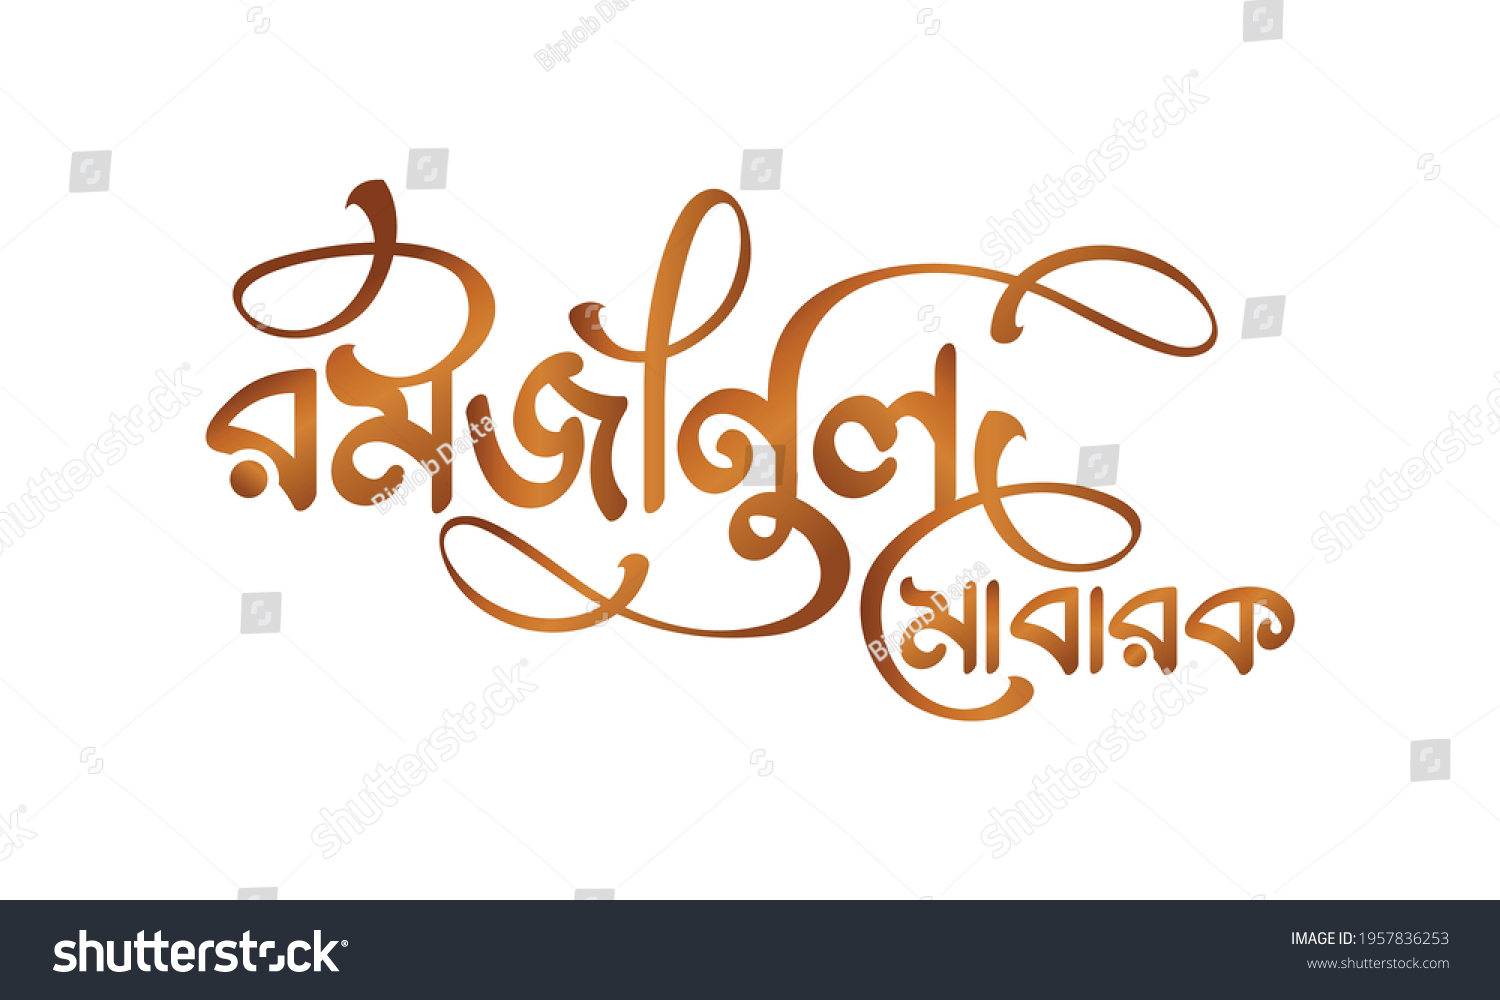 SVG of Ramjanul Mubarak bangla typography, calligraphy, logo, handmade font, custom bangla letter and bengali lettring on white background with gold style text. svg